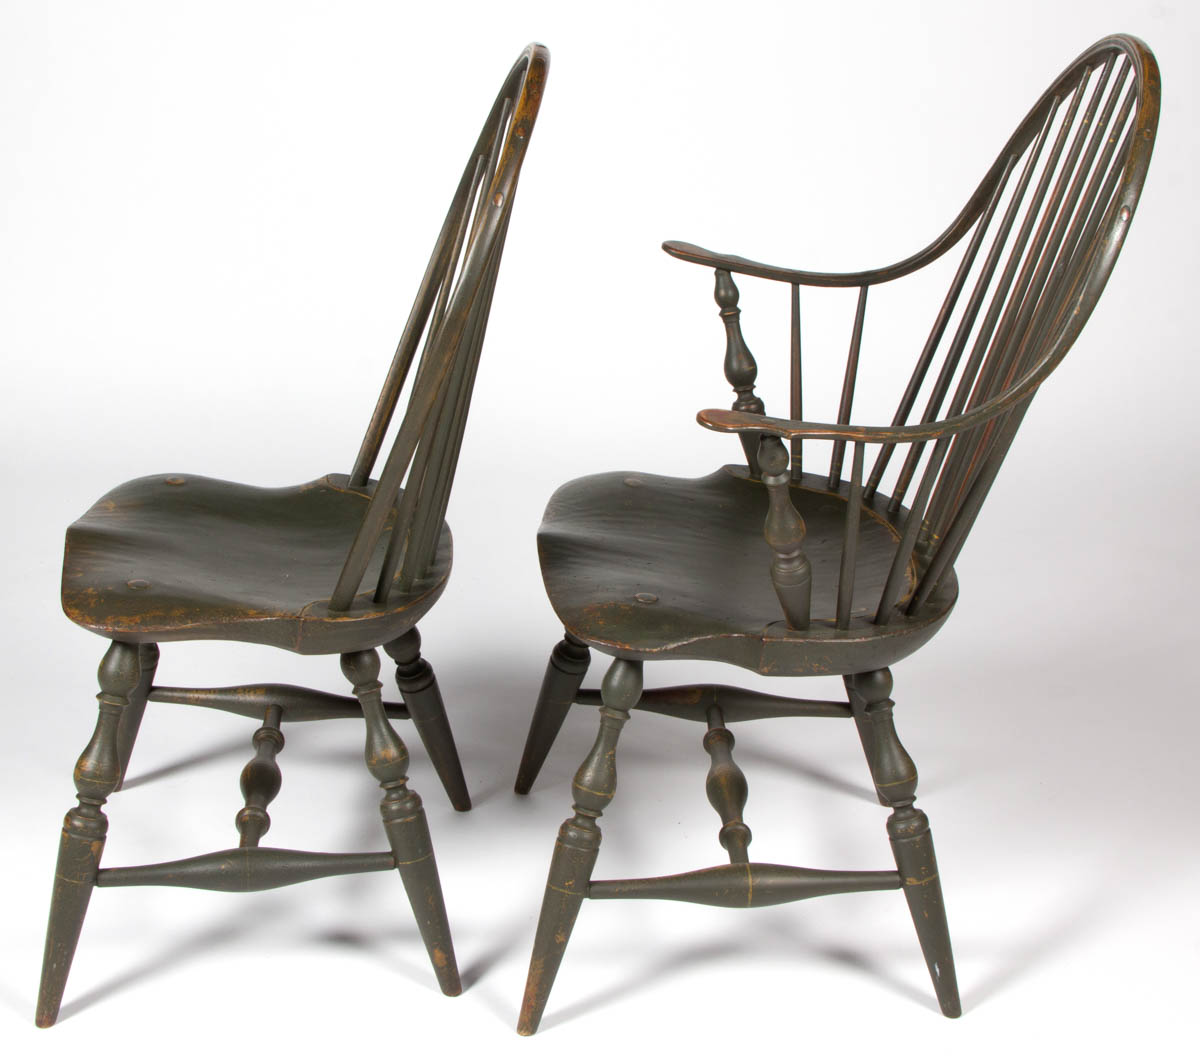 NEW HAMPSHIRE REPRODUCTION WINDSOR BOW-BACK CHAIRS, SET OF EIGHT